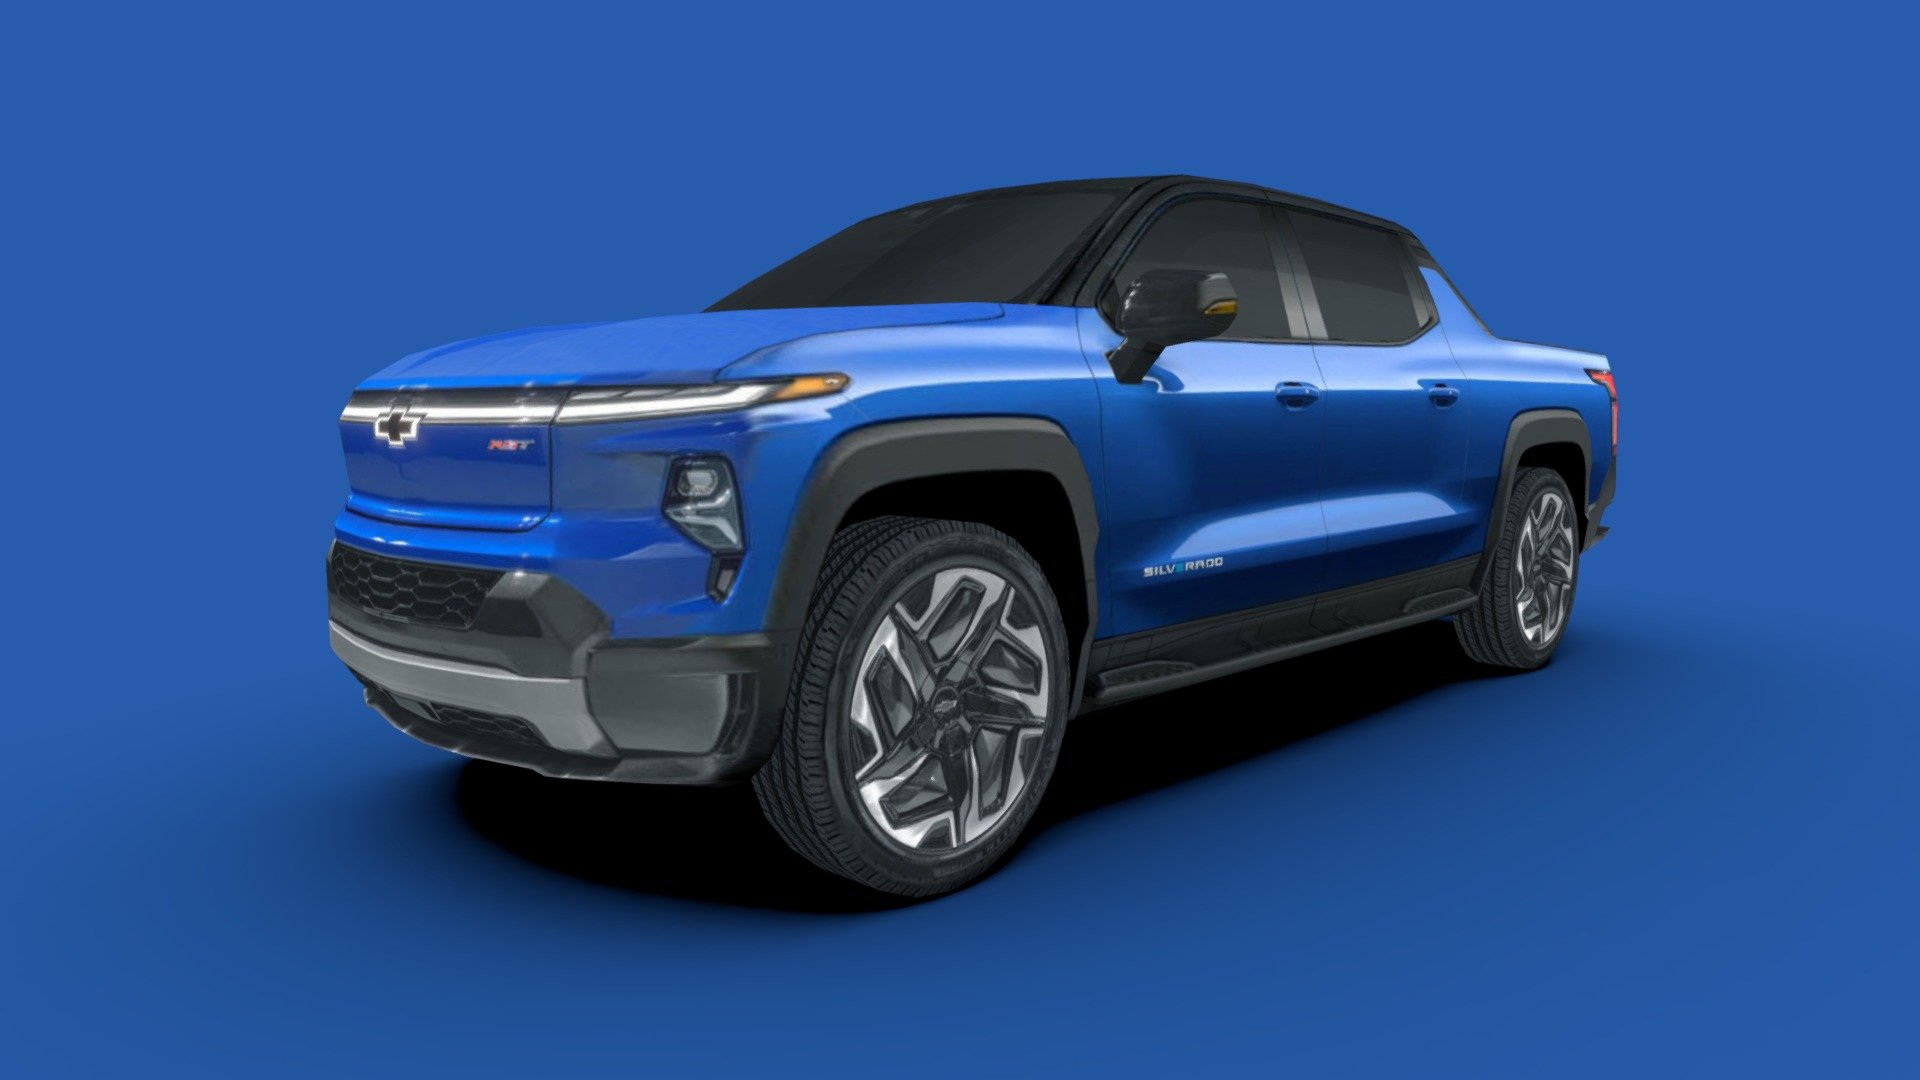 3d model of the 2024 Chevrolet Silverado EV RST, an all-electric Pickup truck.

The model is very low-poly, full-scale, real photos texture (single 2048 x 2048 png).

Package includes 5 file formats and texture (3ds, fbx, dae, obj and skp)

Hope you enjoy it.

José Bronze - Chevrolet Silverado EV RST 2024 - Buy Royalty Free 3D model by Jose Bronze (@pinceladas3d) 3d model